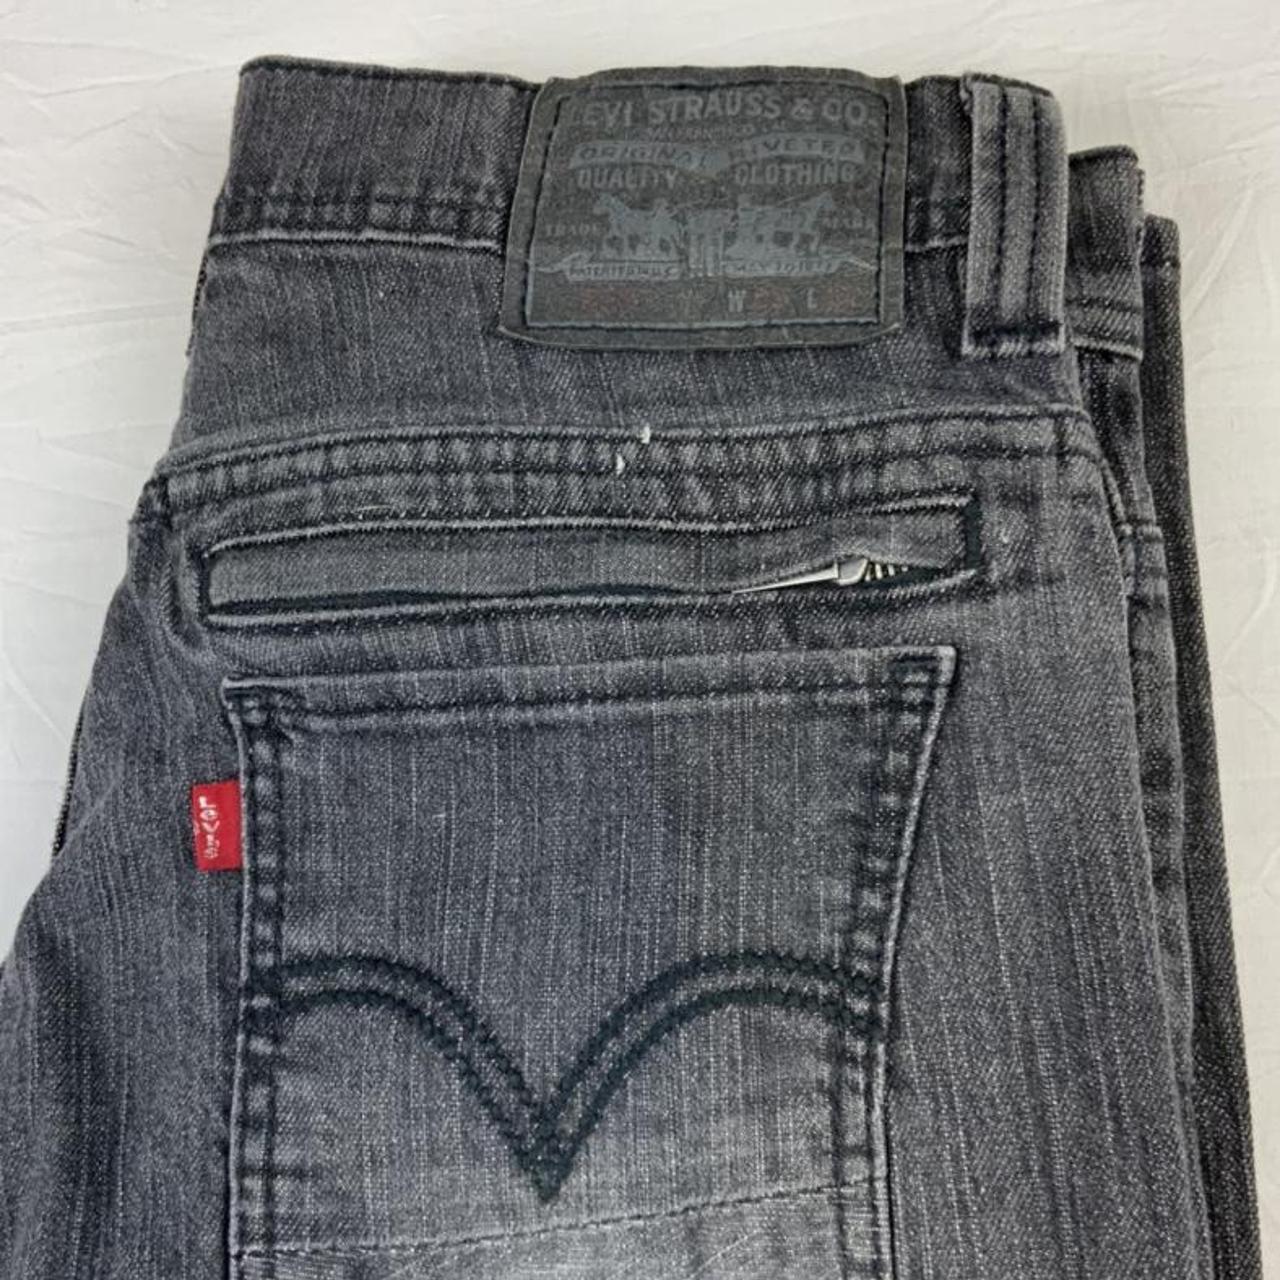 Levi's 511 women's black faded jeans, with matching... - Depop